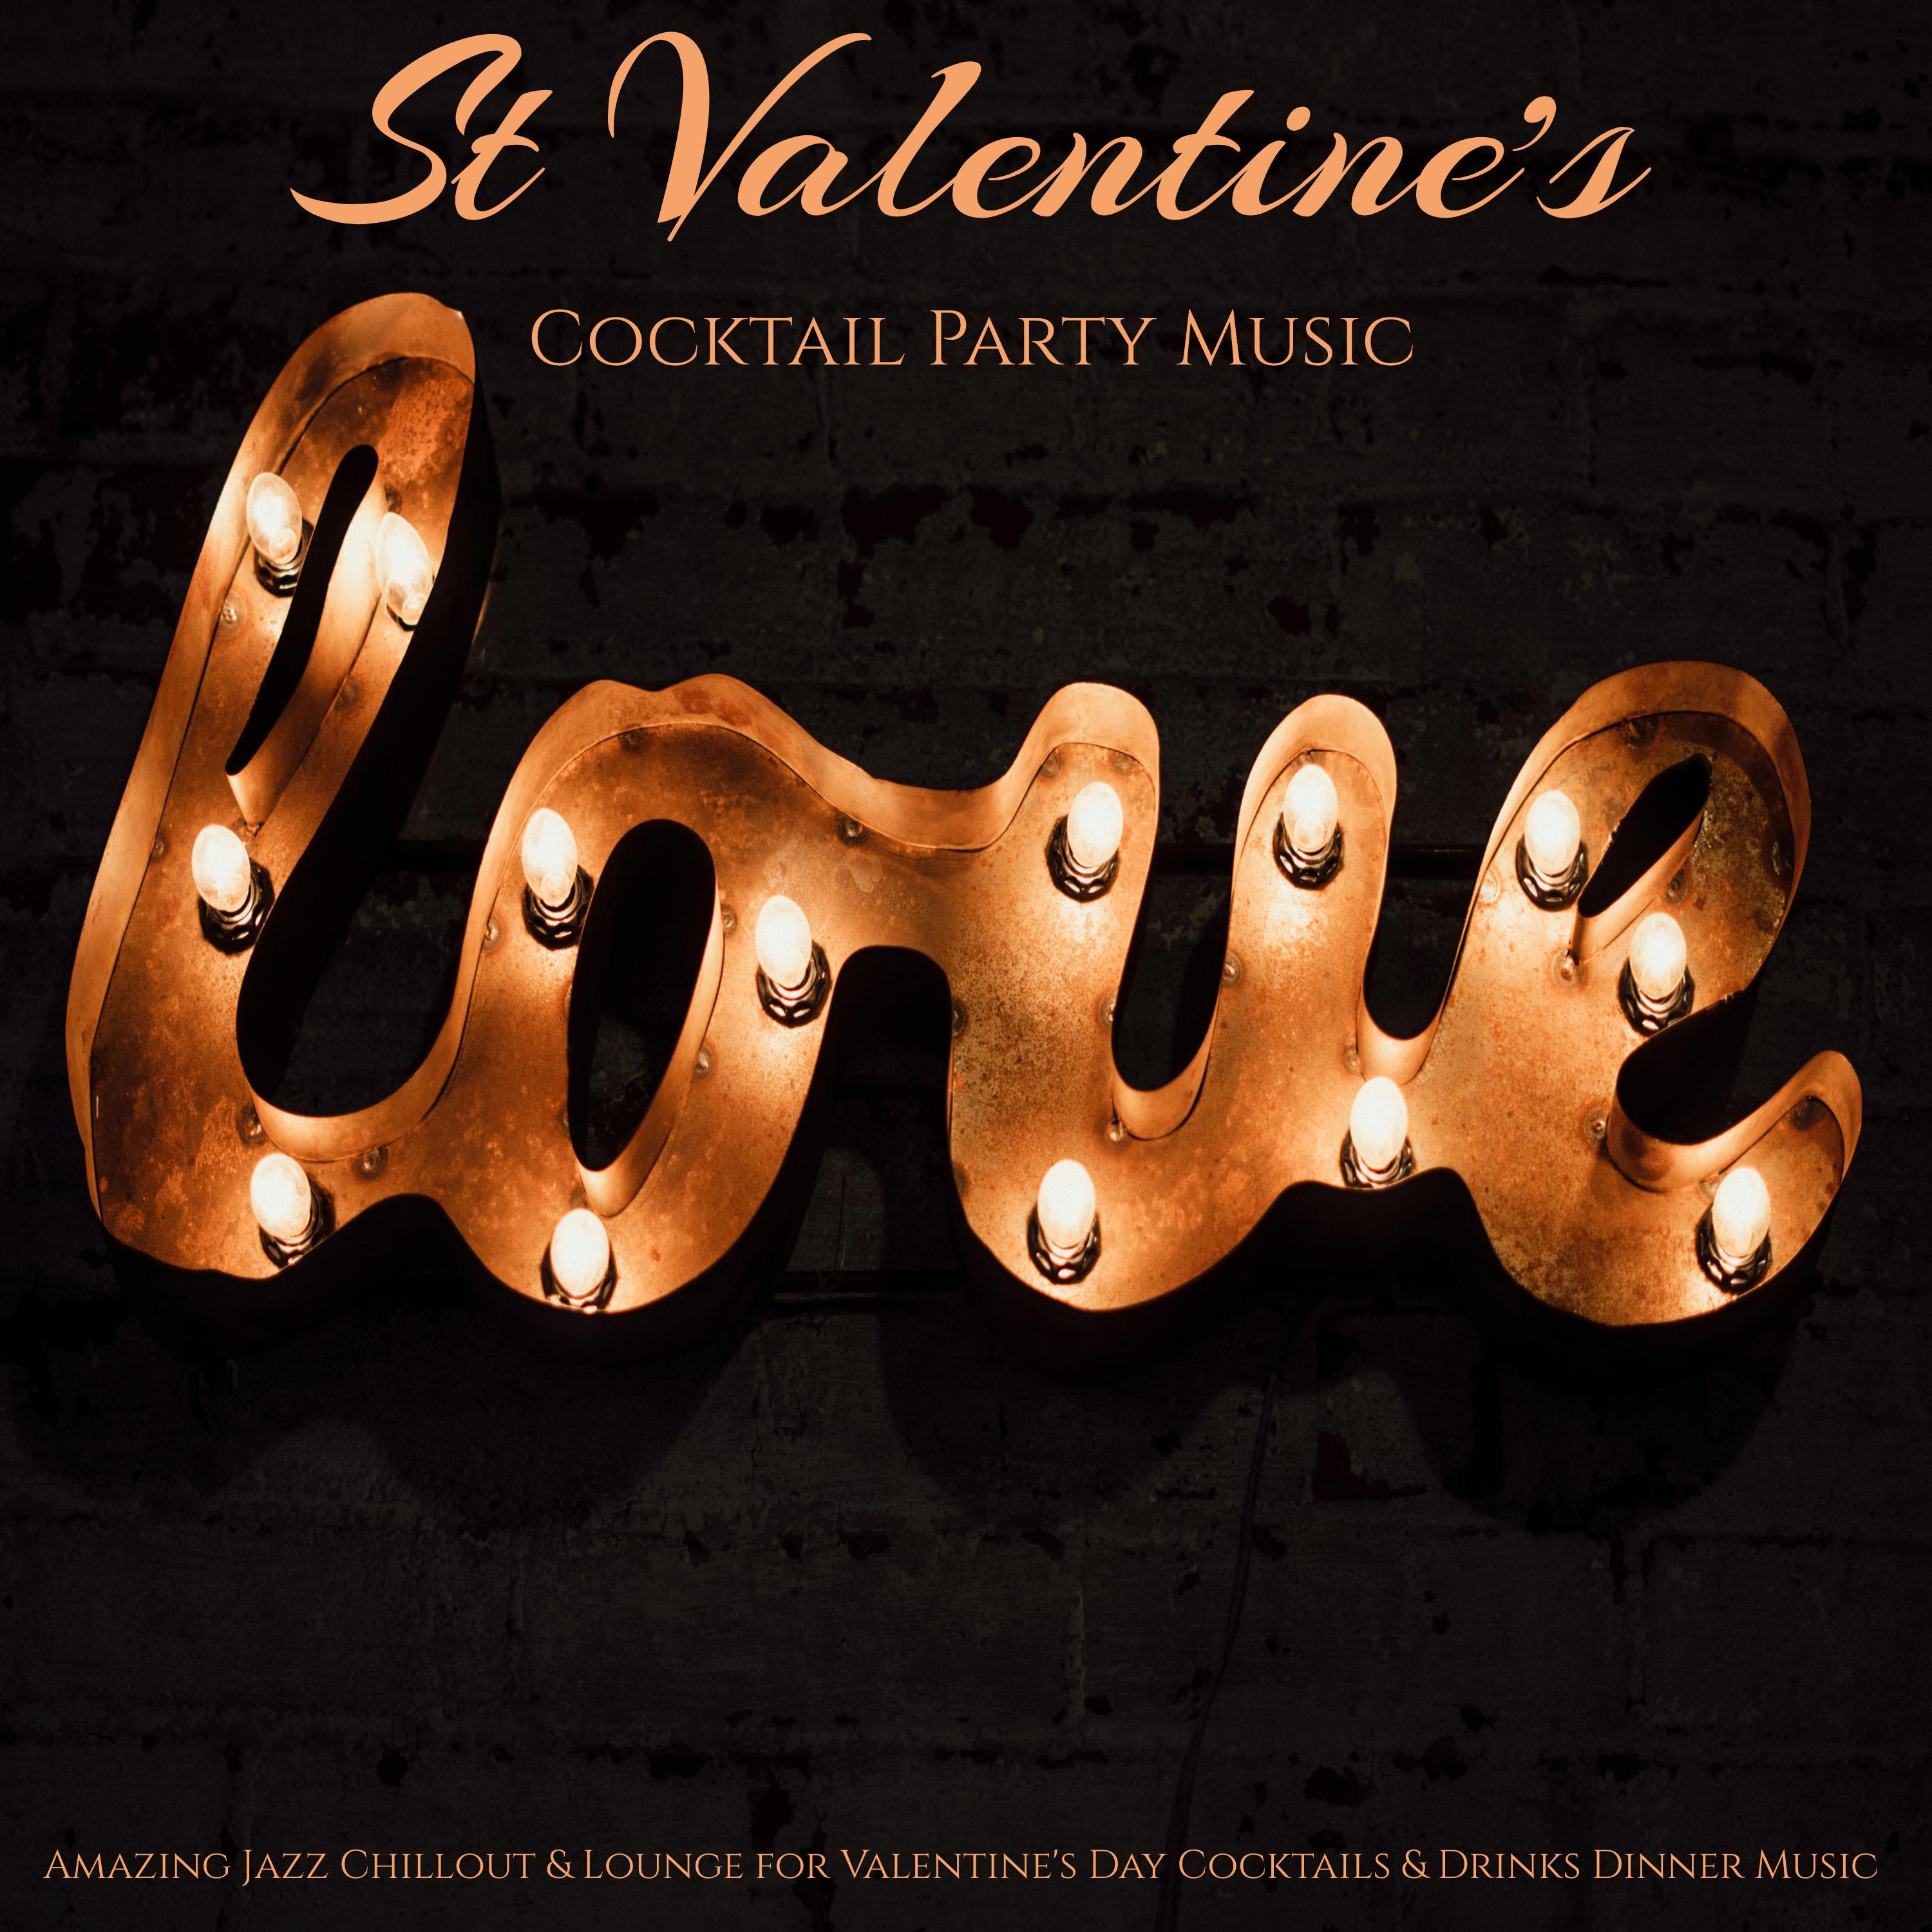 St Valentine' s Cocktail Party Music  Amazing Jazz Chillout  Lounge for Valentine' s Day Cocktails  Drinks Dinner Music